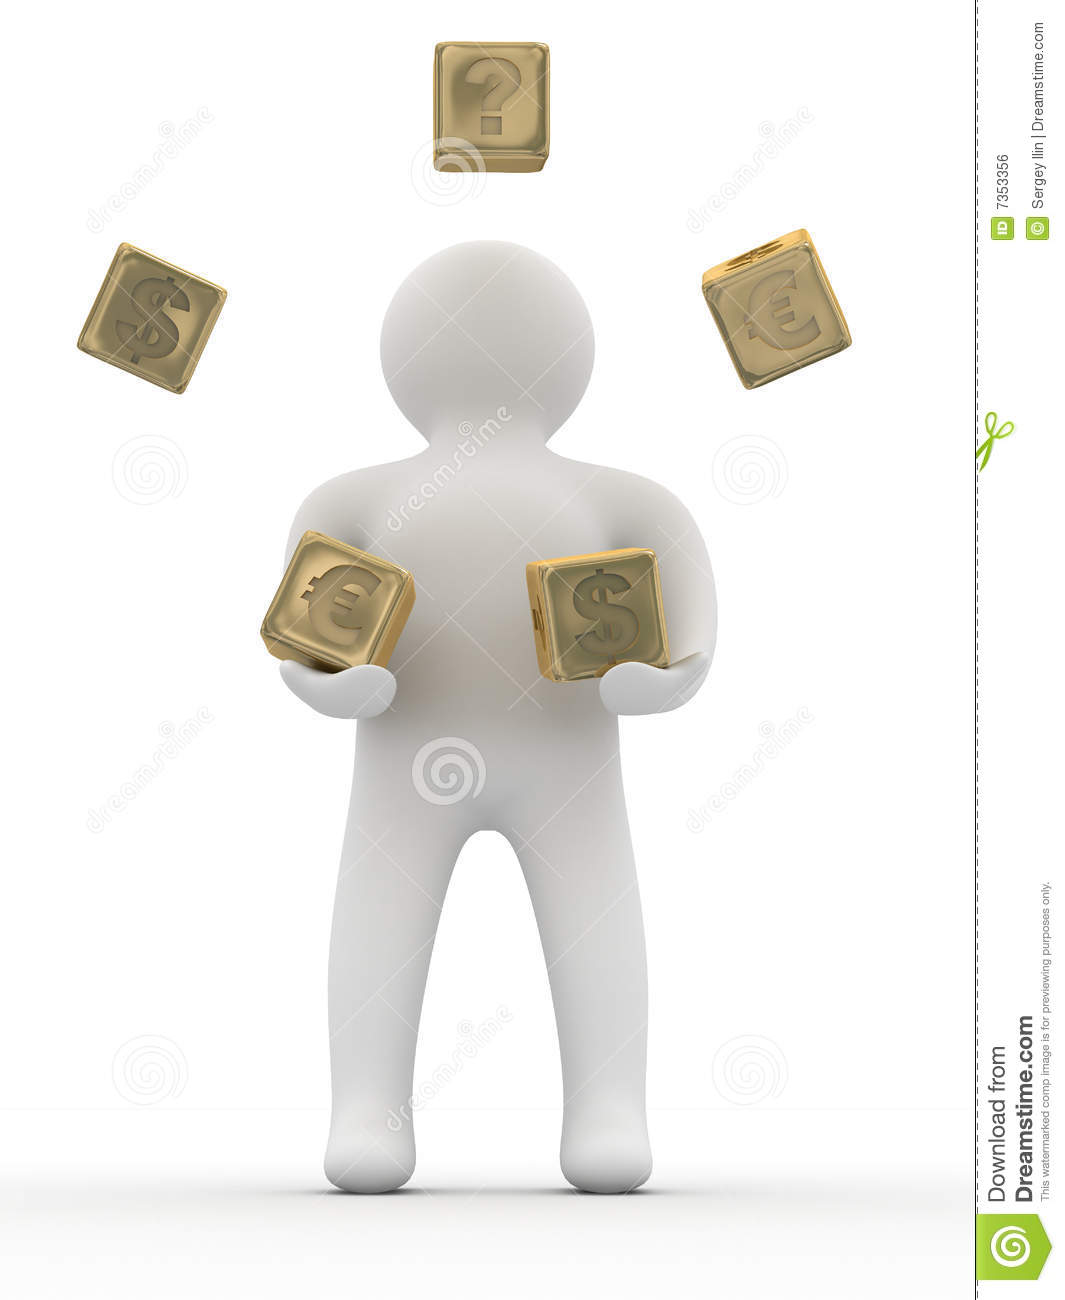 Person Throwing Cubes  Royalty Free Stock Image   Image  7353356